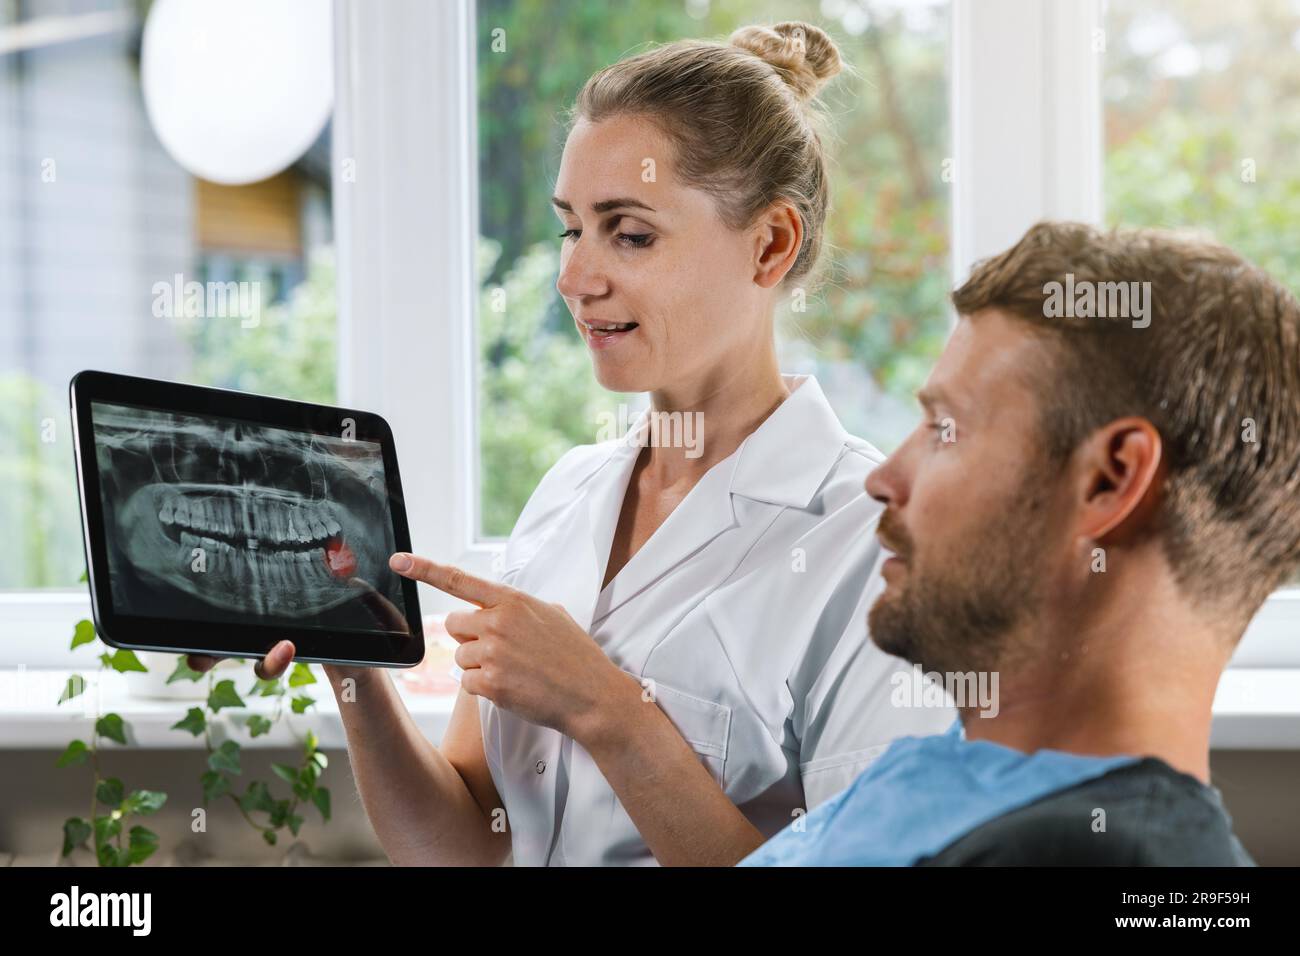 dentist showing and explaining dental x-ray picture with impacted wisdom tooth to his patient Stock Photo